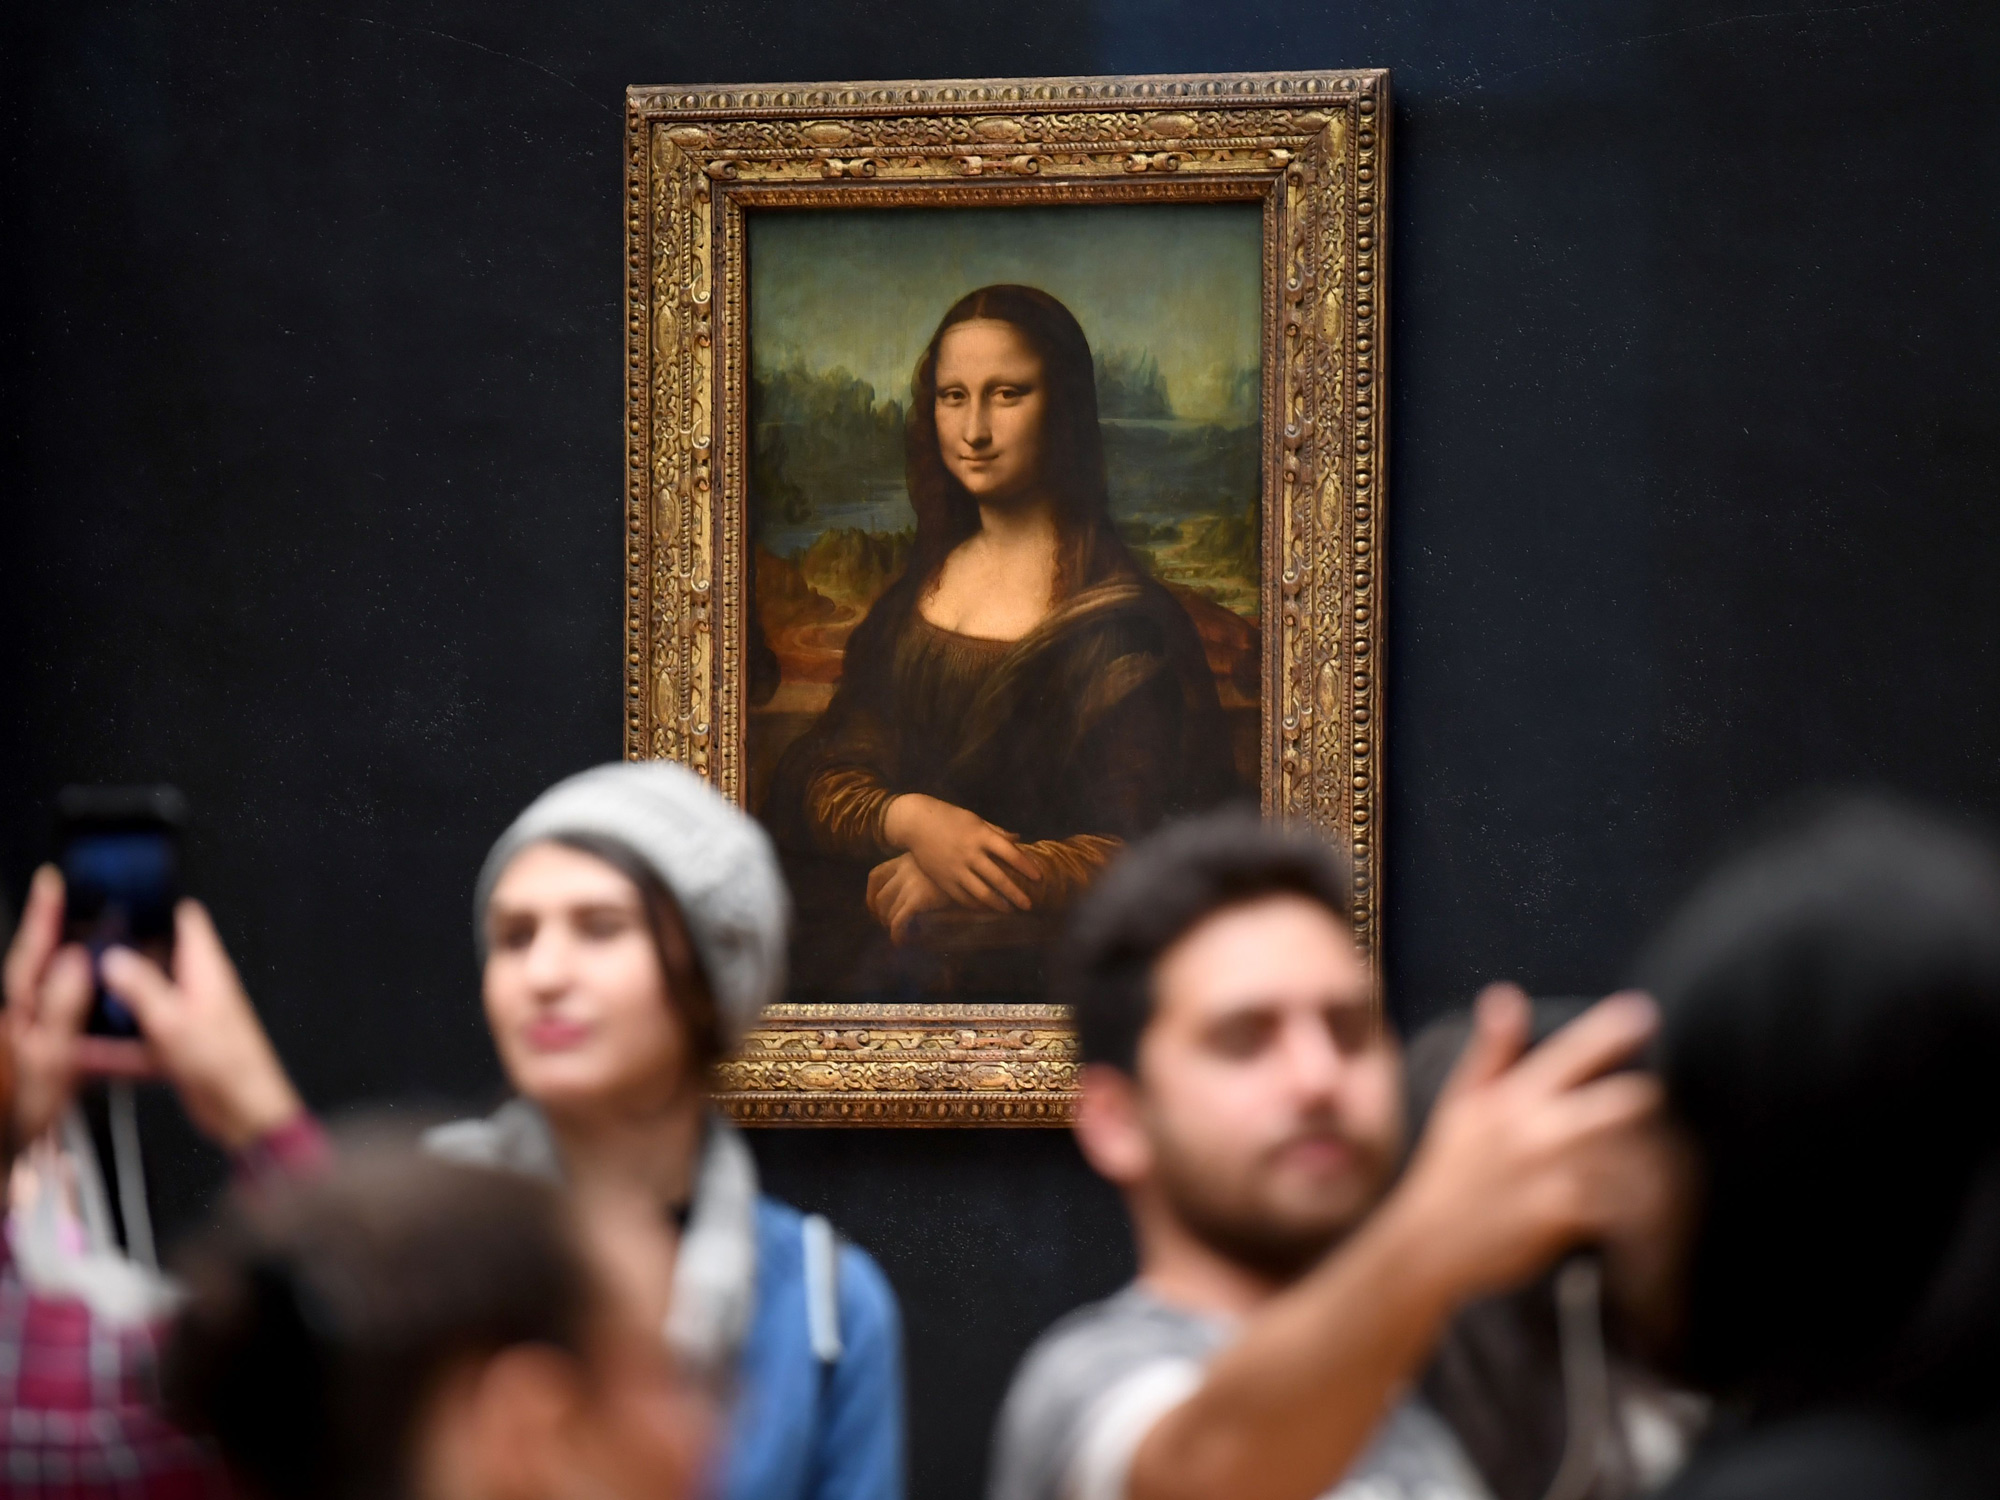 This Artist's Sexual Relationship With the Mona Lisa Involves